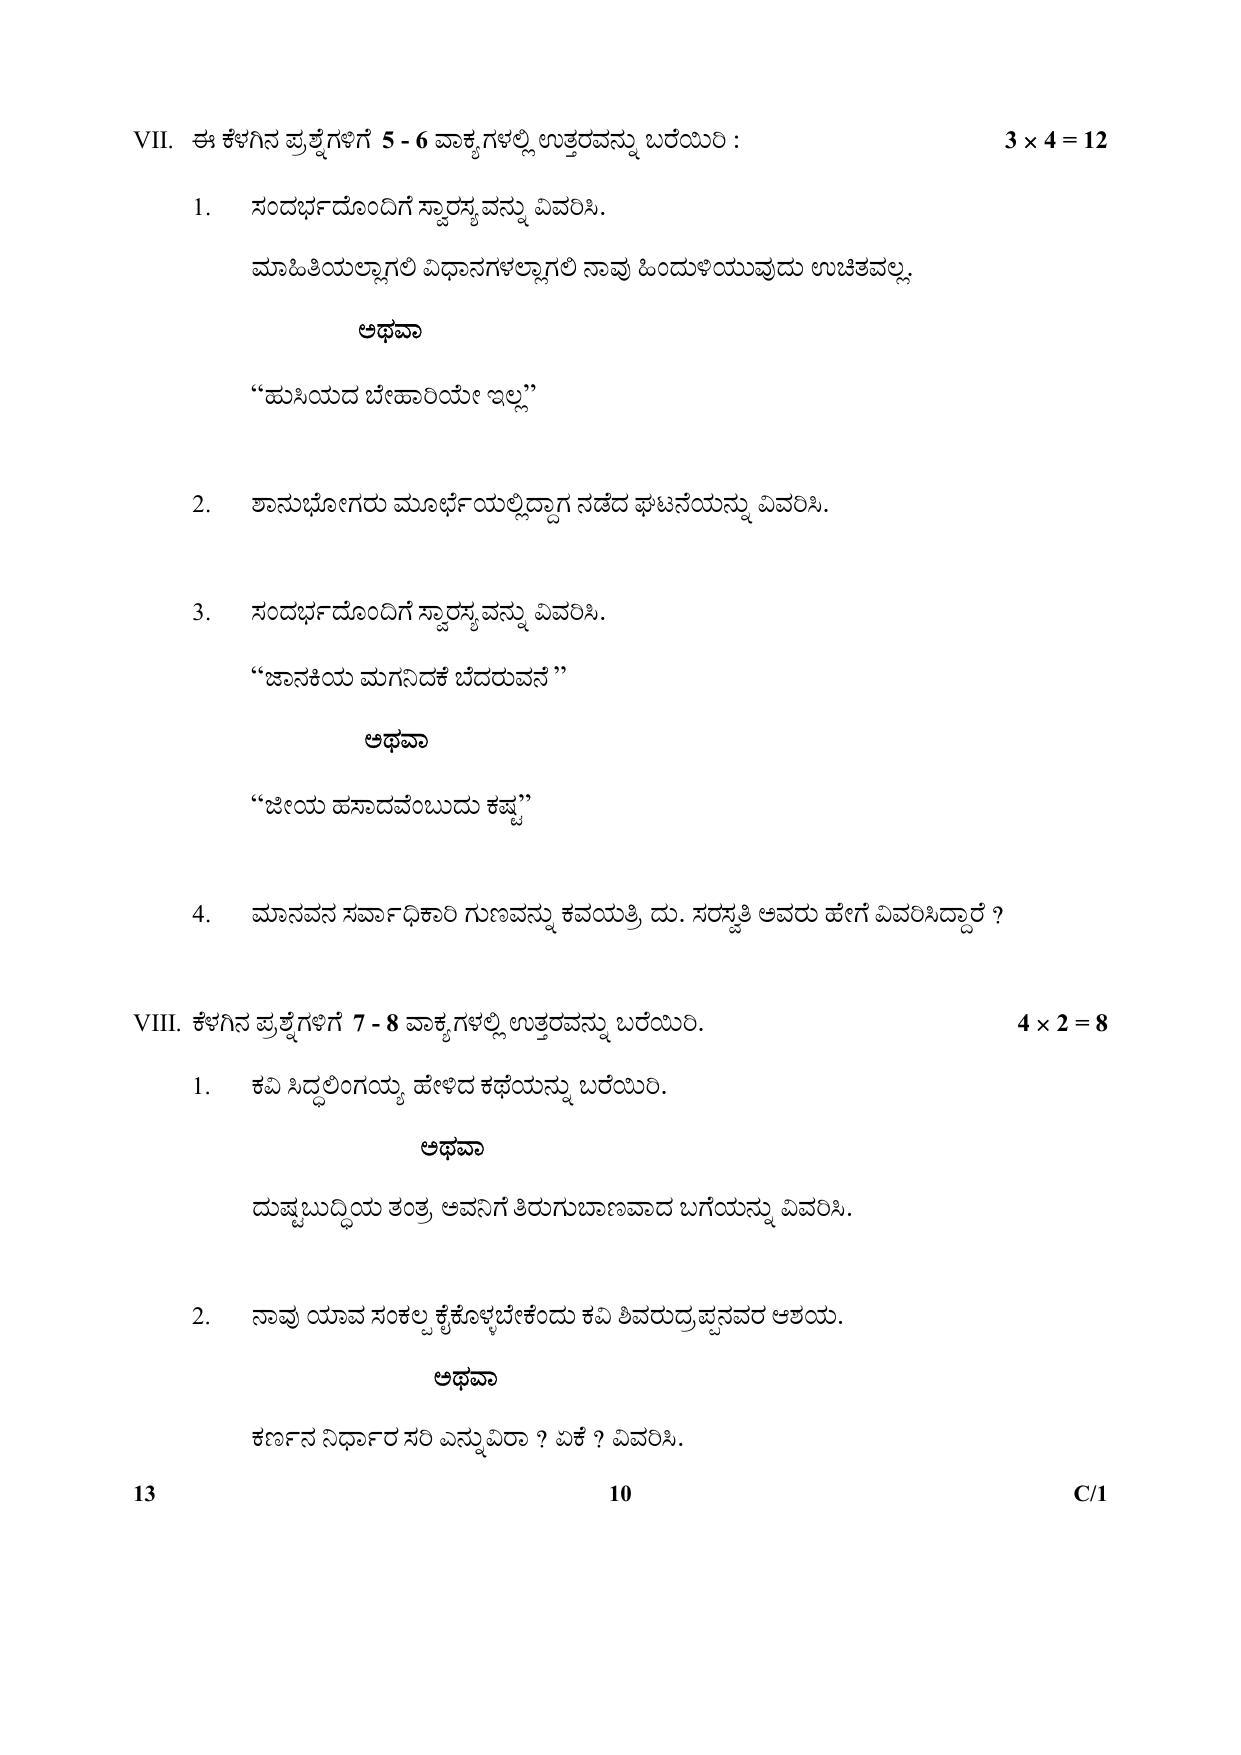 CBSE Class 10 13 (Kannada) 2018 Compartment Question Paper - Page 10